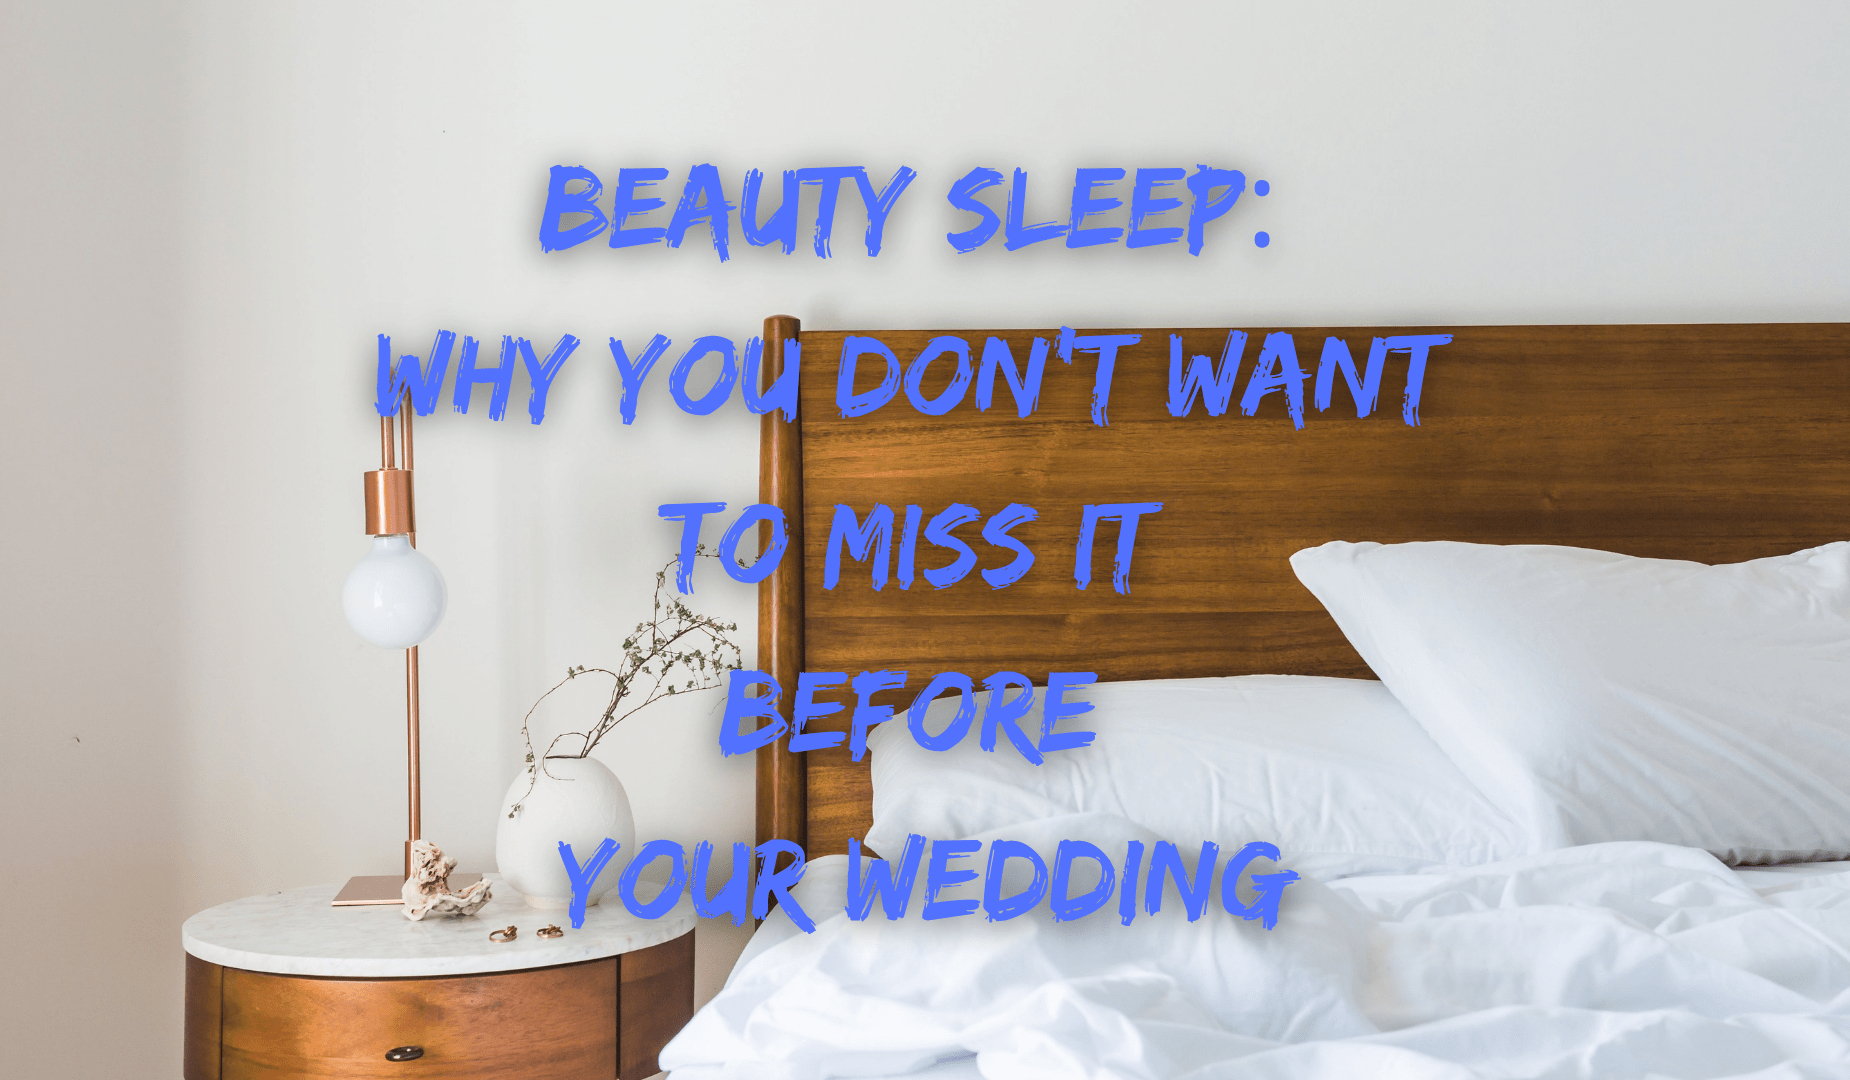 Beauty Sleep: Why You Don’t Want To Miss It Before Your Wedding